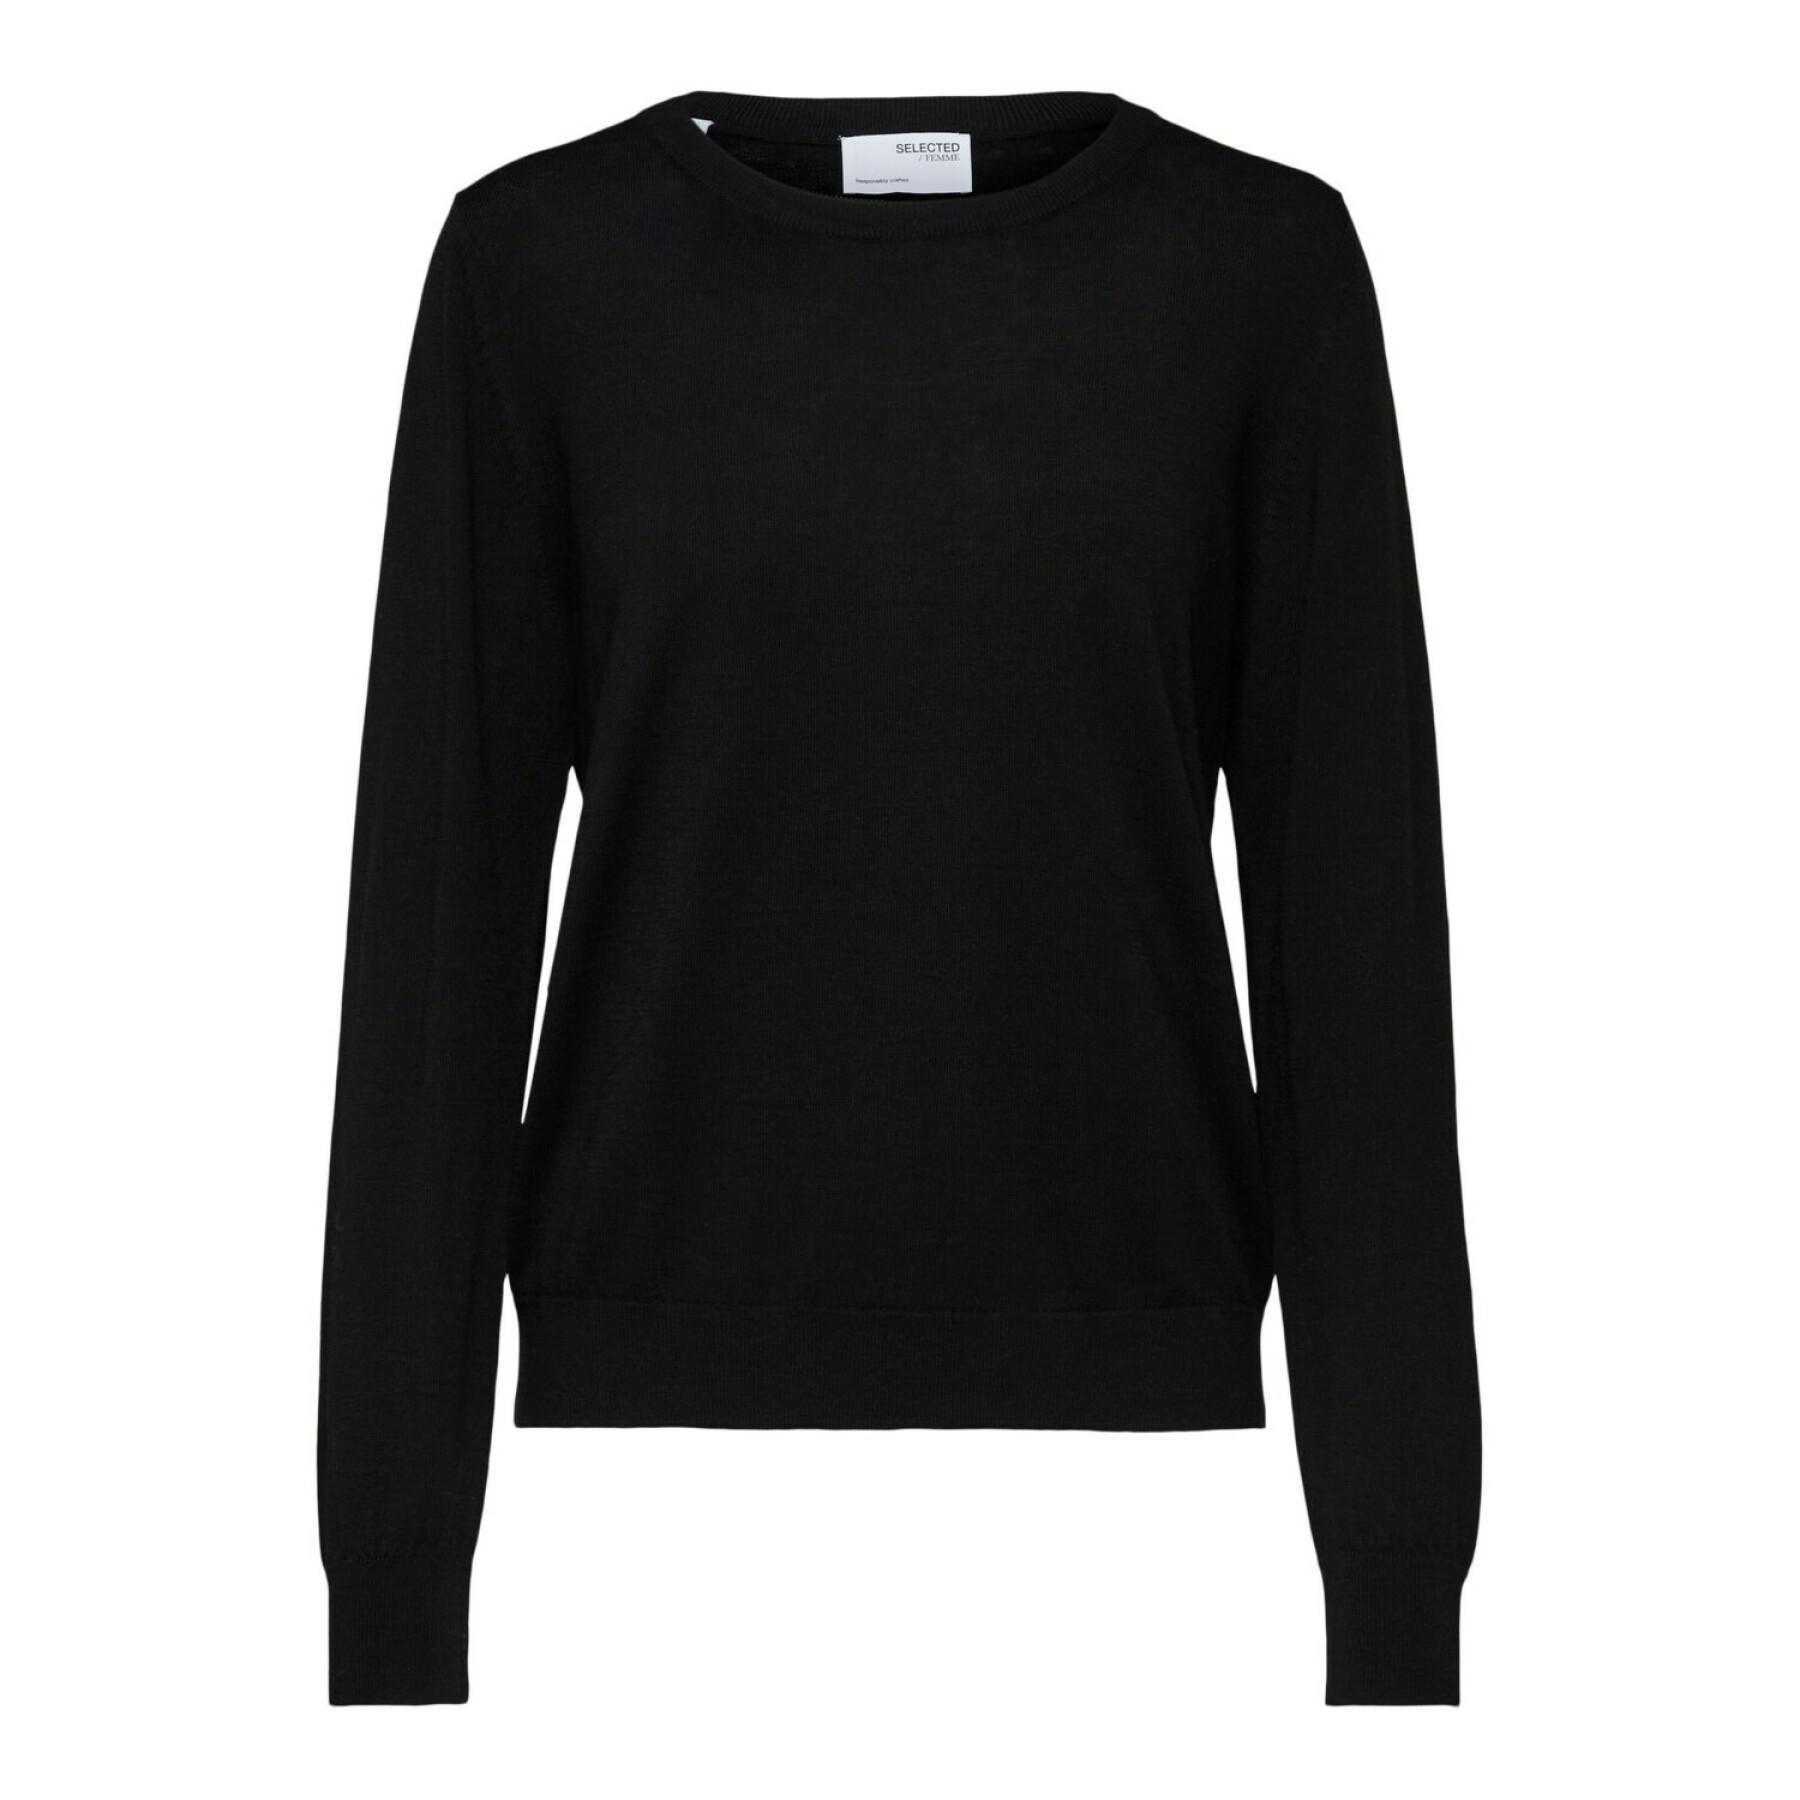 Women's round neck sweater Selected Magda